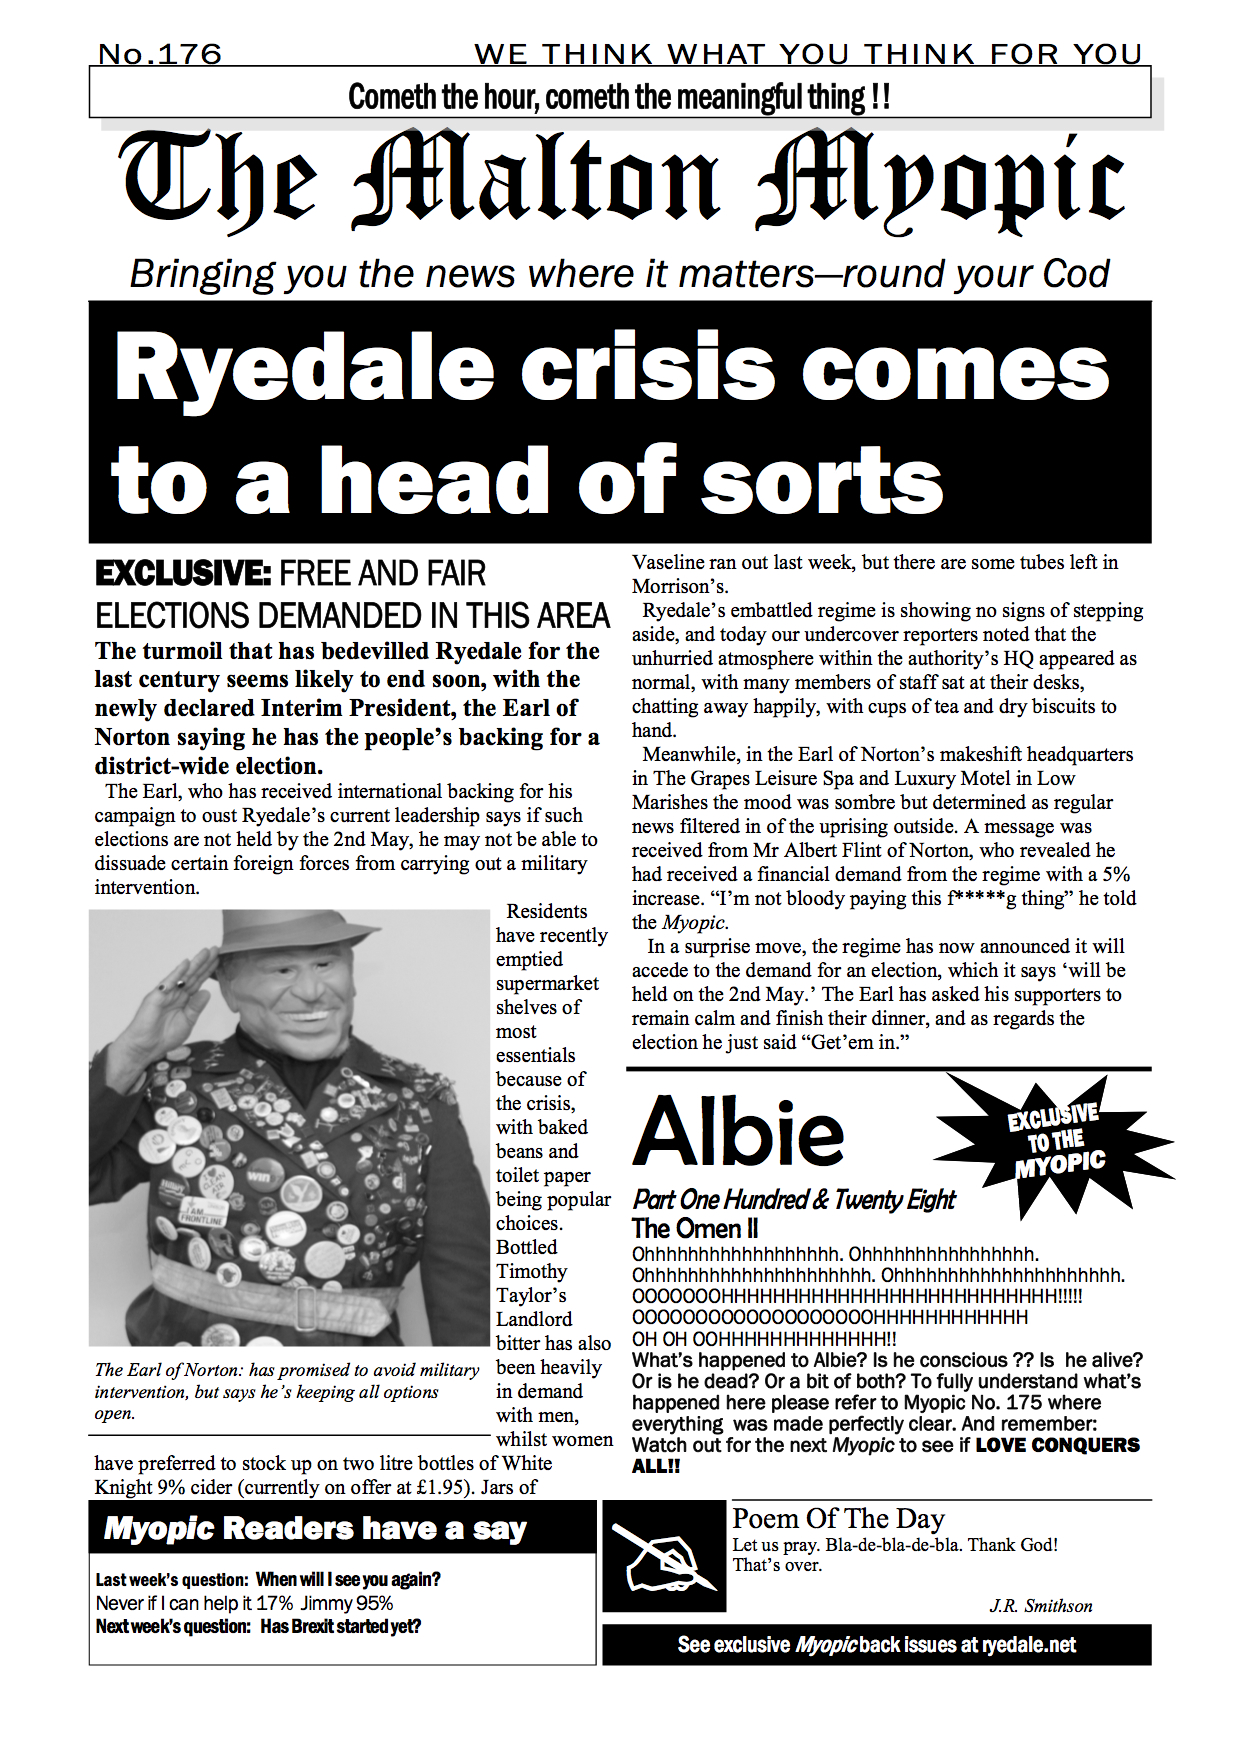 Ryedale election crisis 